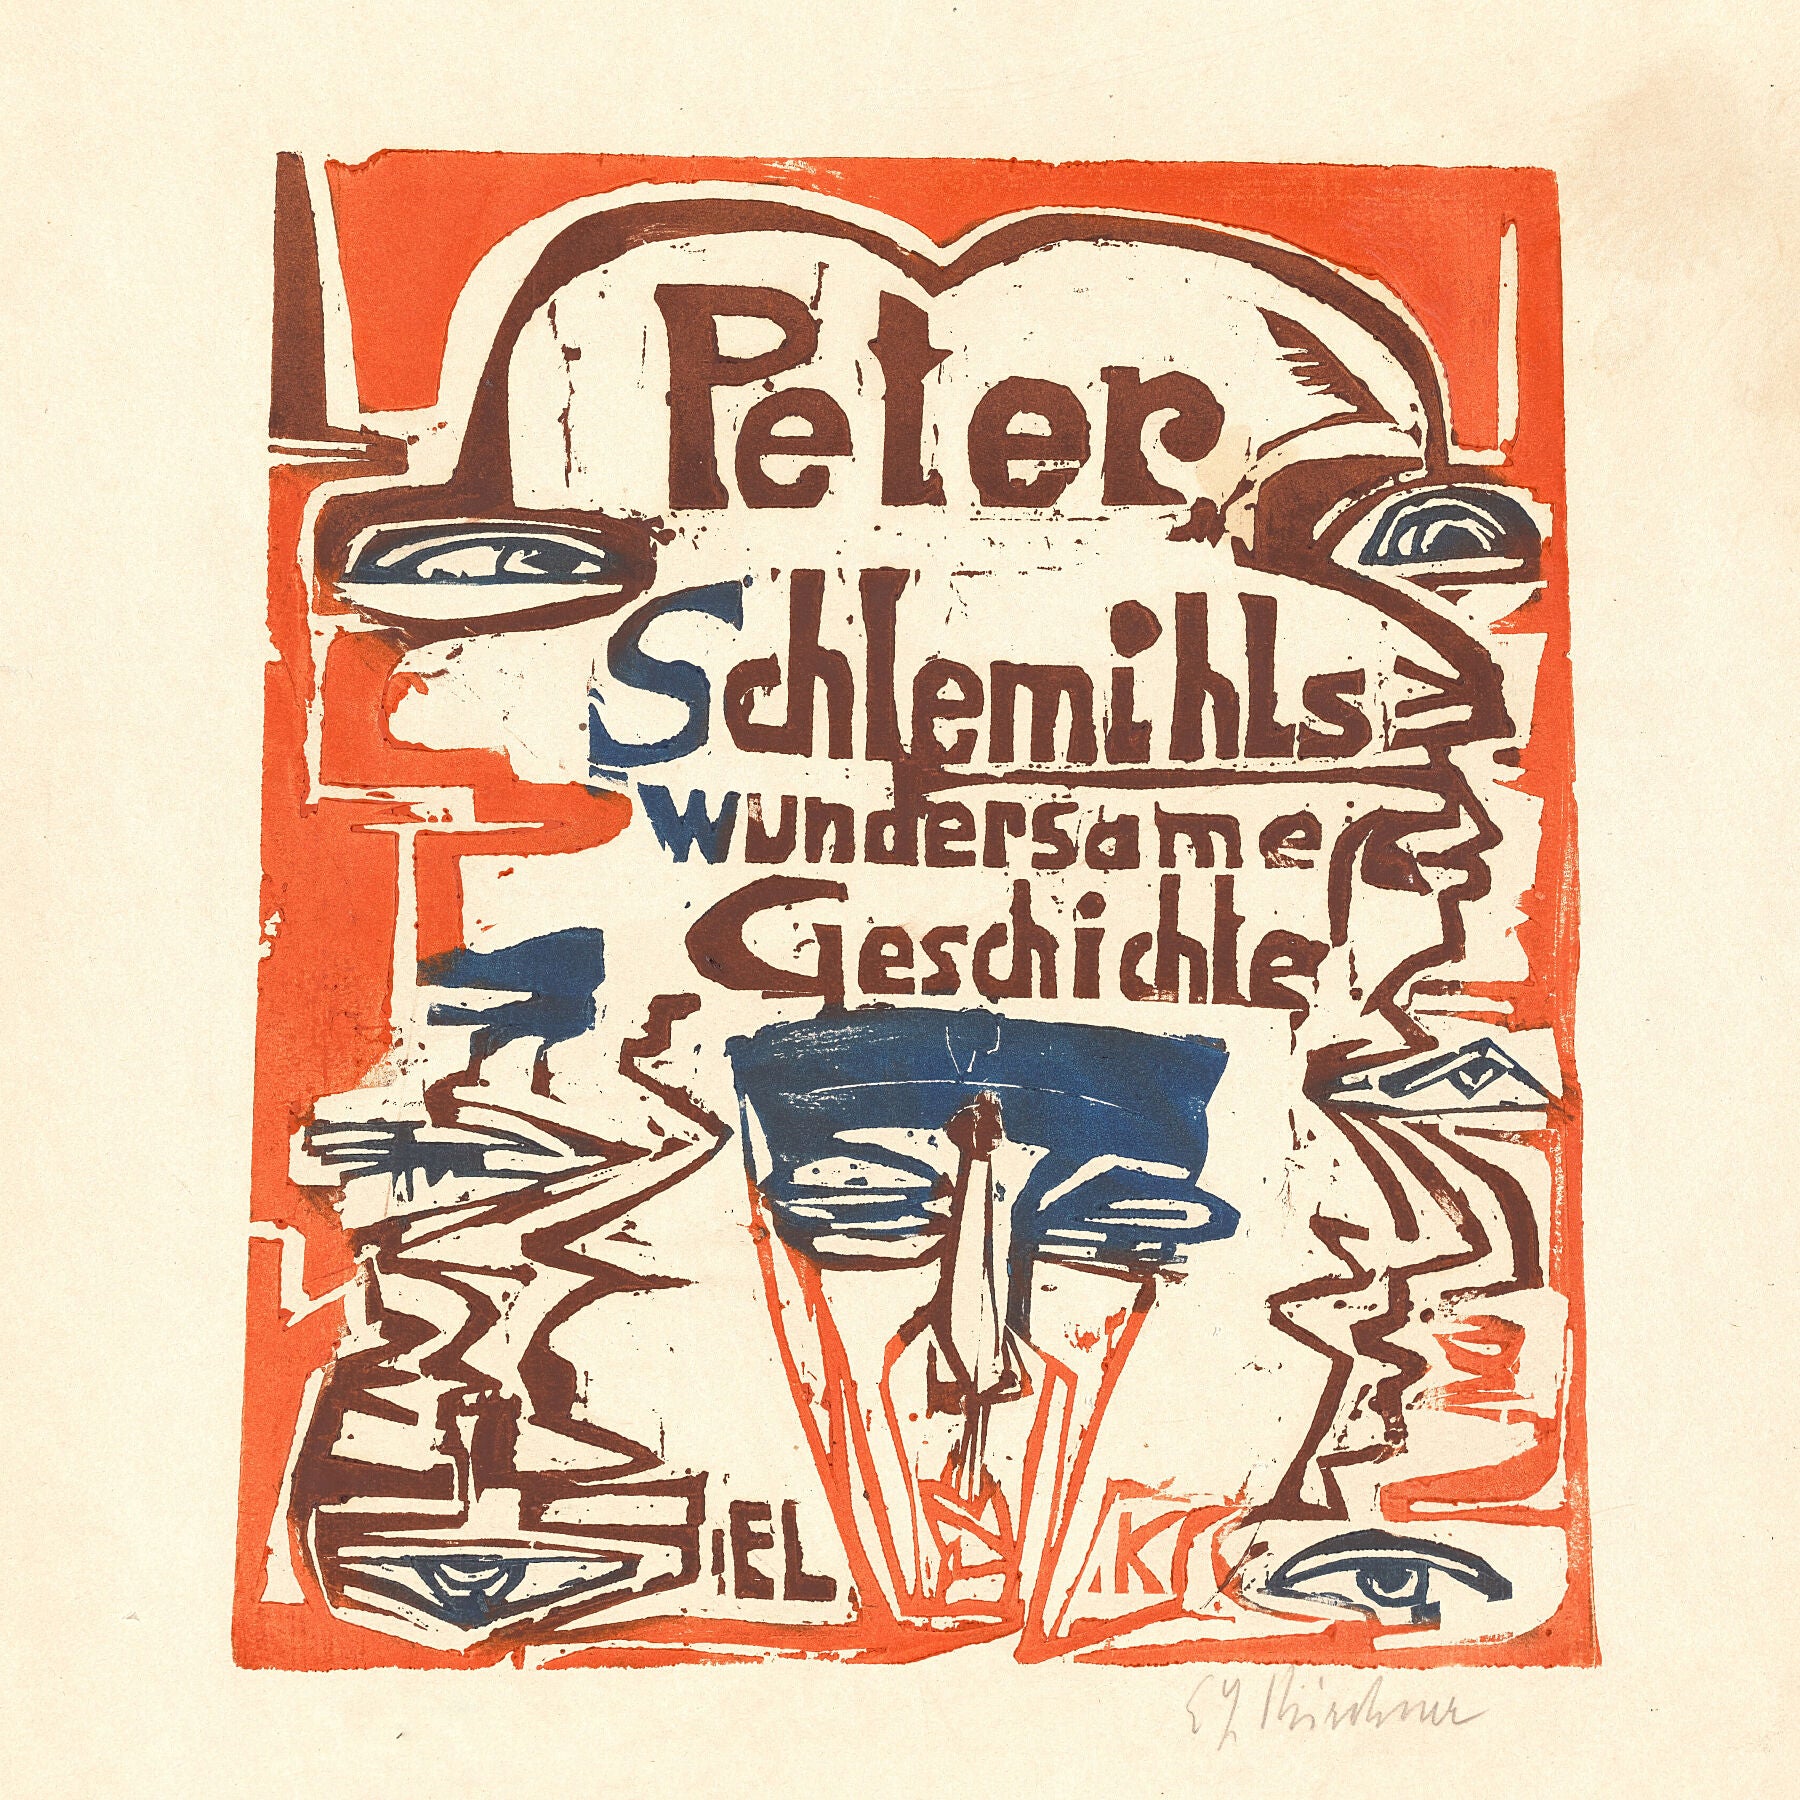 Peter Schlemihls Wundersame Geschichte (Peter Schlemihl's Wondrous Story) (Title Page) by Ernst Ludwig Kirchner - 1915